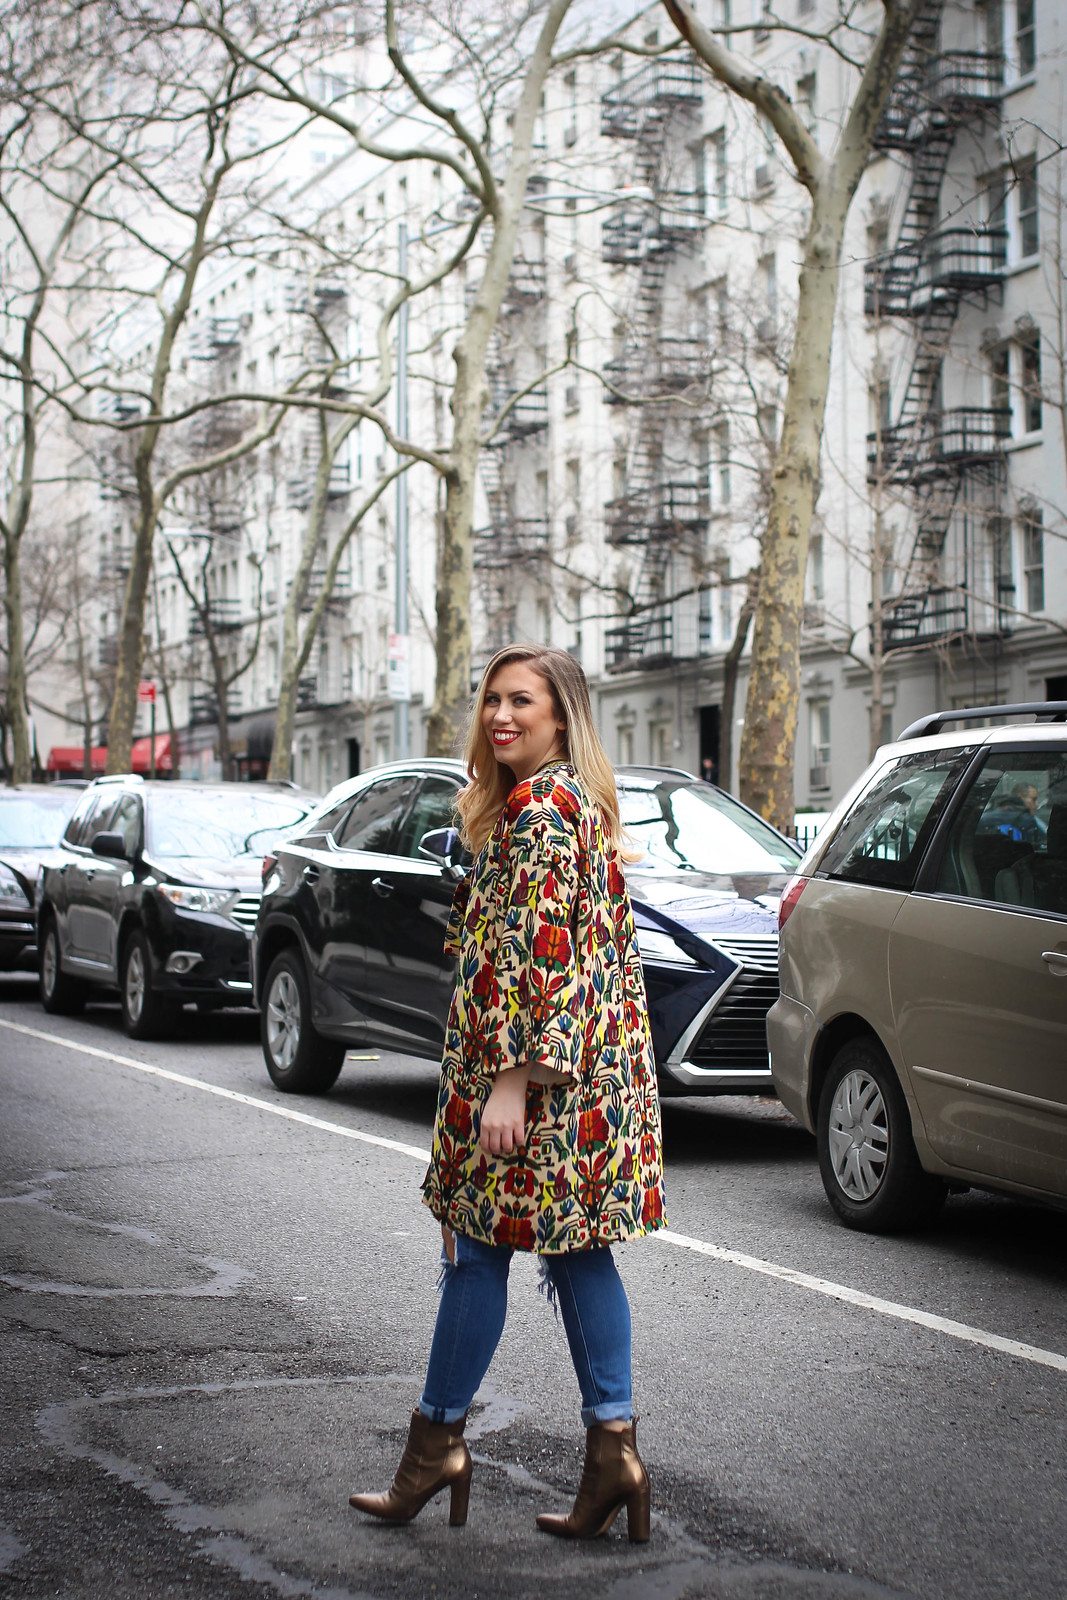 Inexpensive Spring Outfit Idea New York City Fashion Colorful Printed Coat Distressed Denim